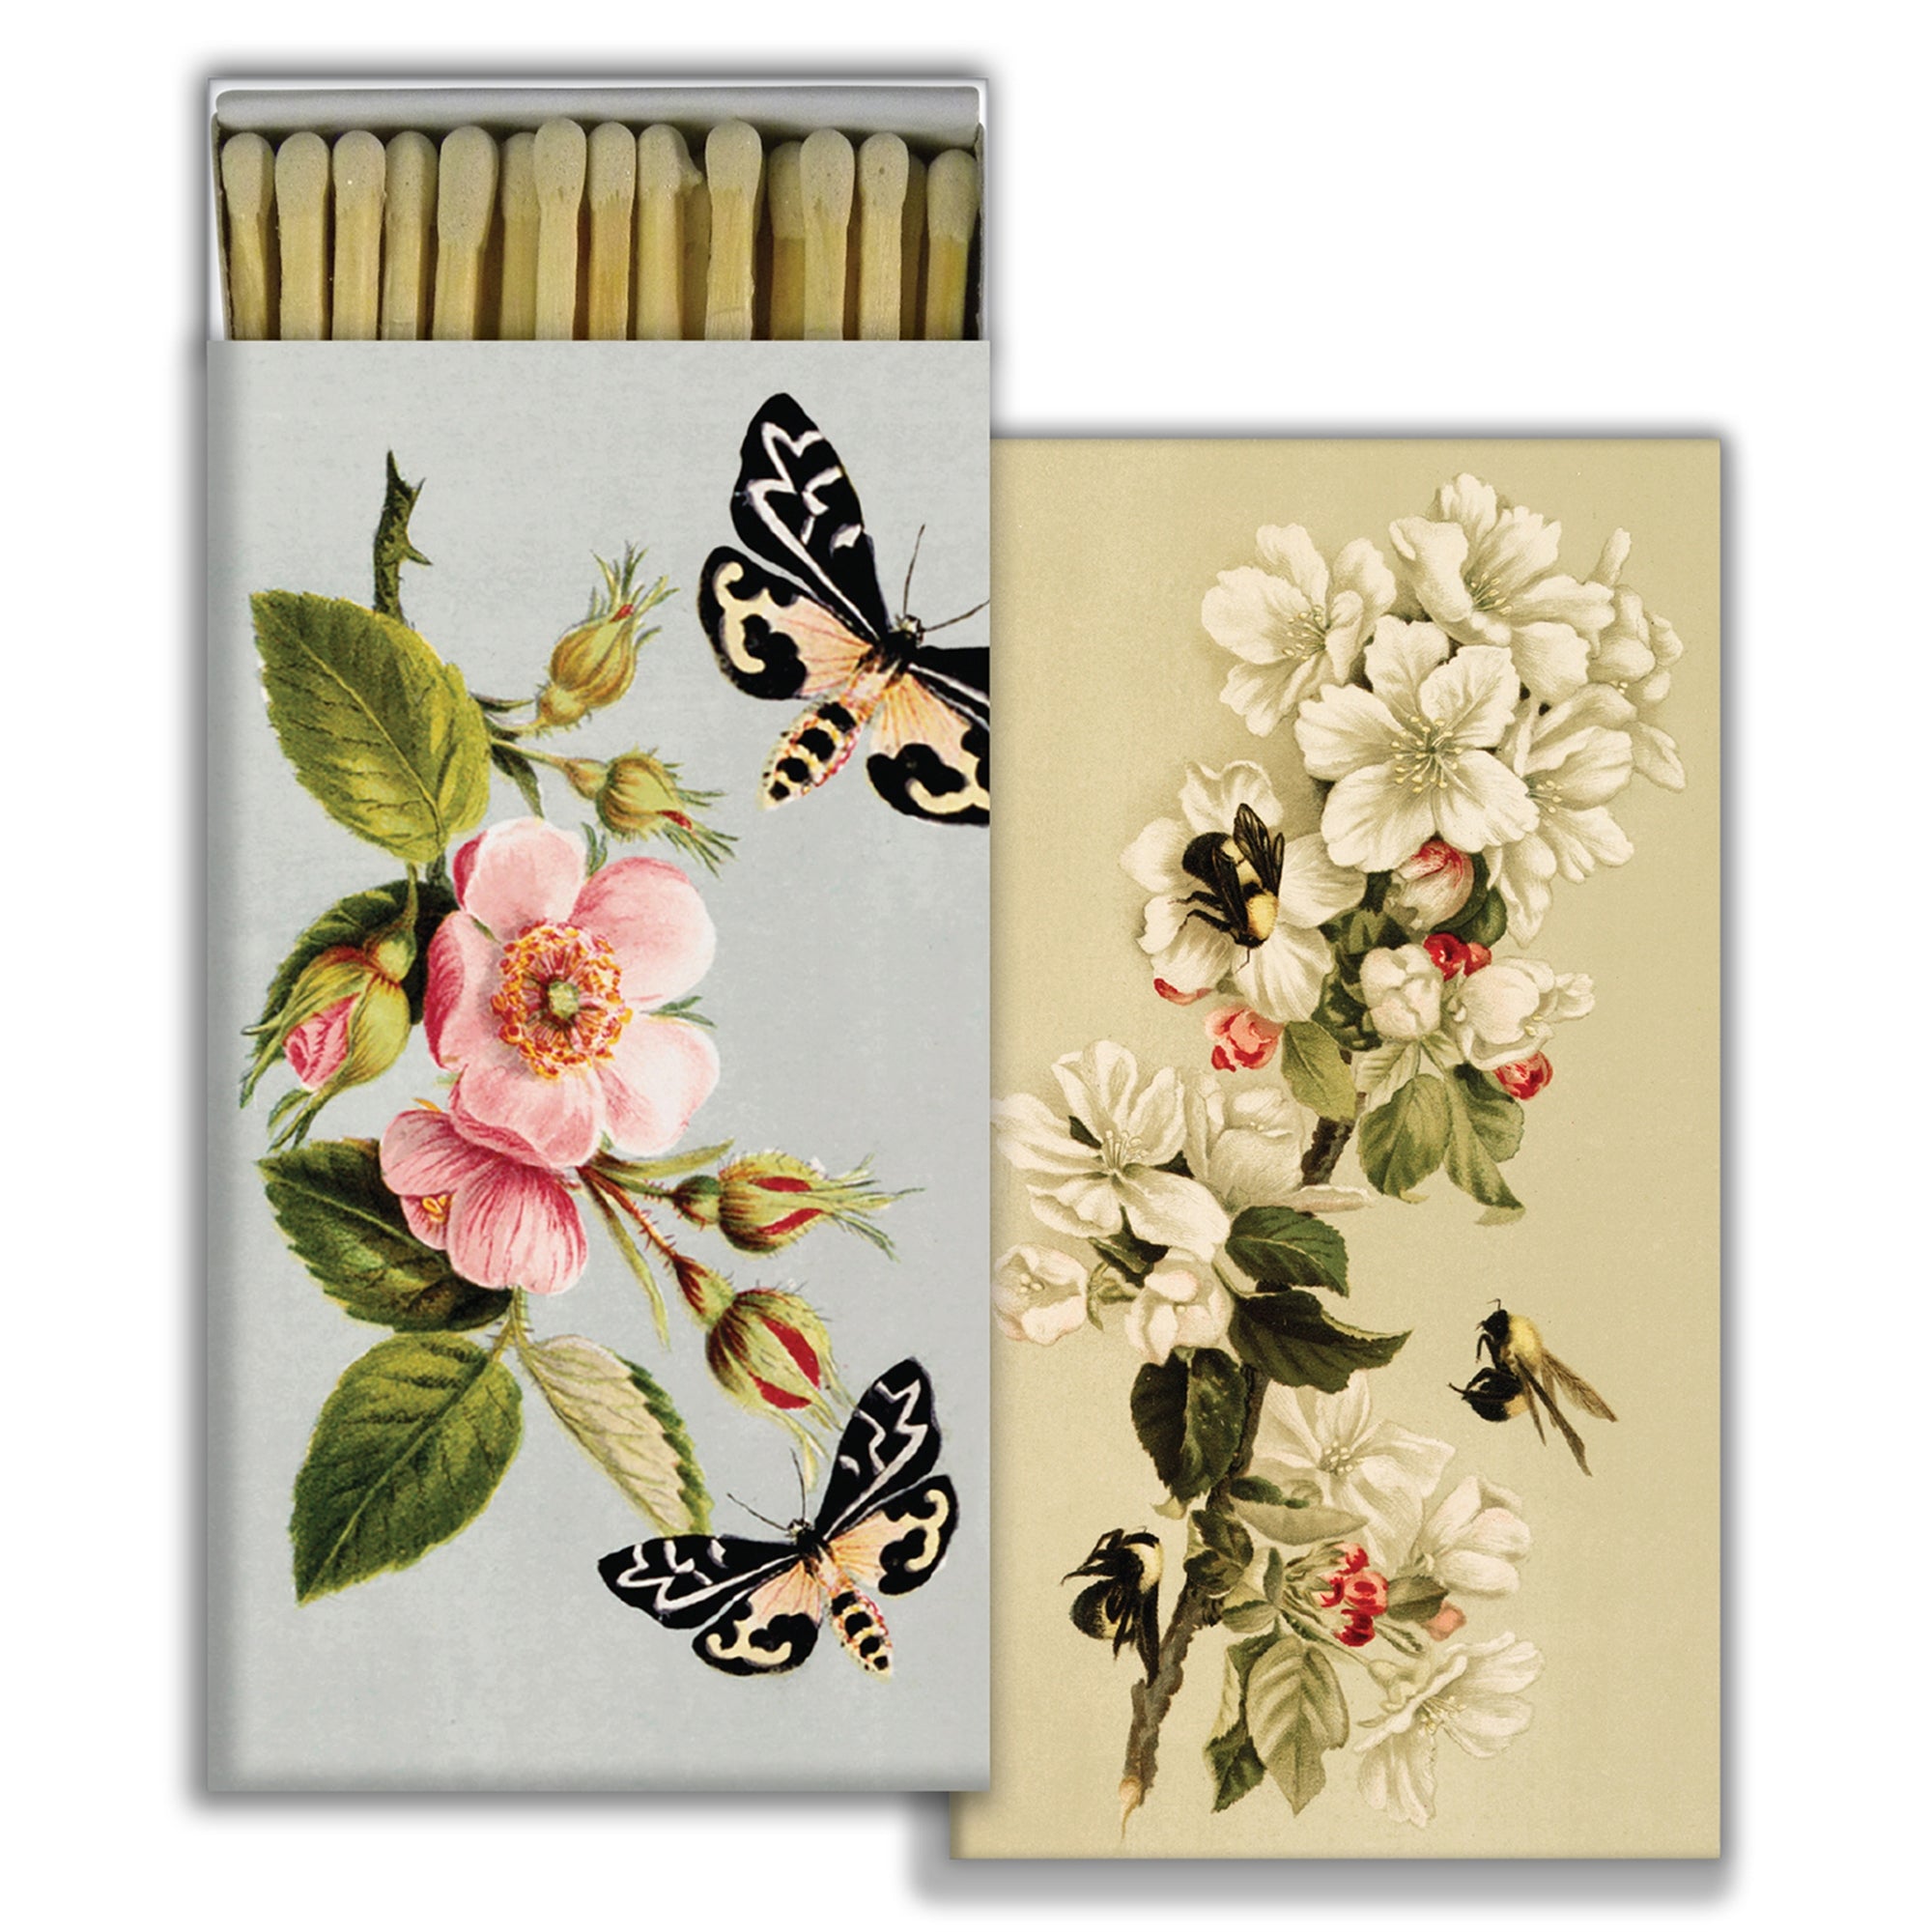 Matches - Insects & Floral - White